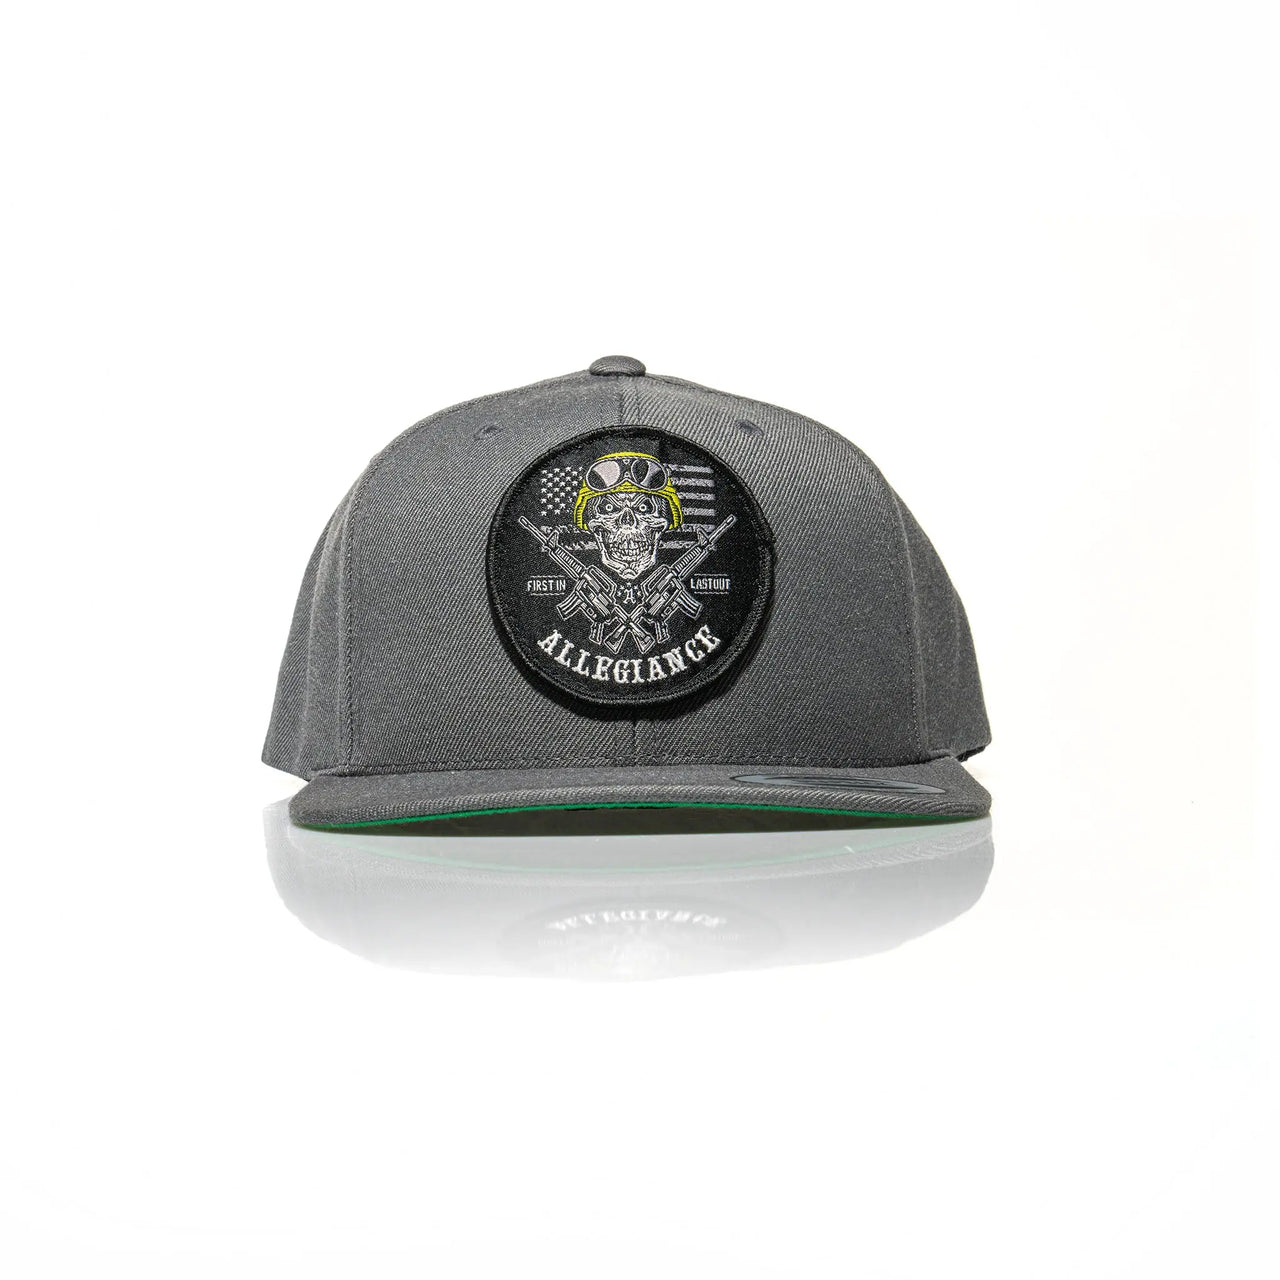 Last Out Snapback